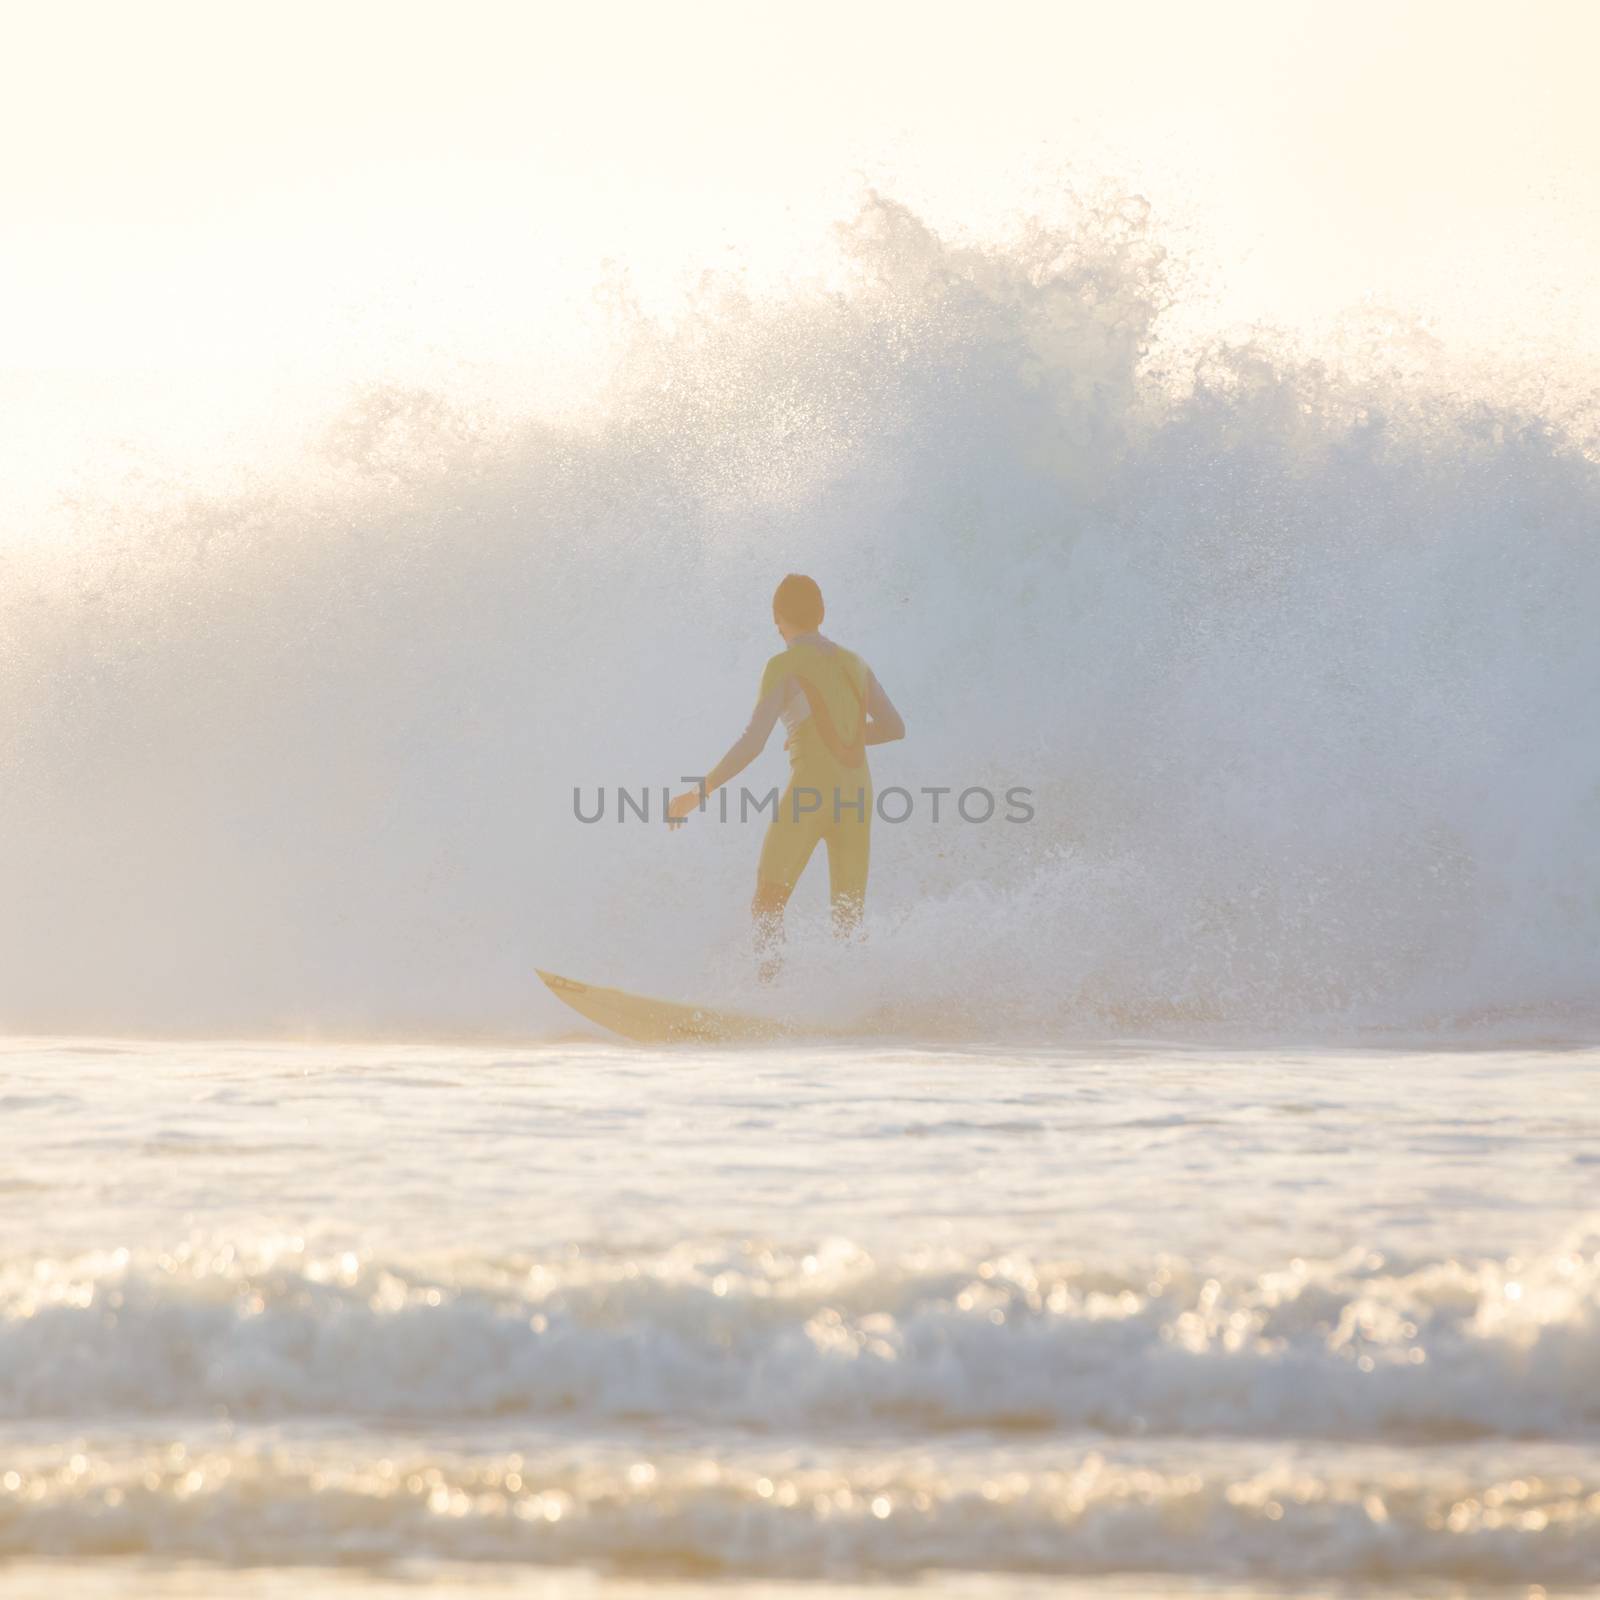 Surfer riding a big wave. by kasto